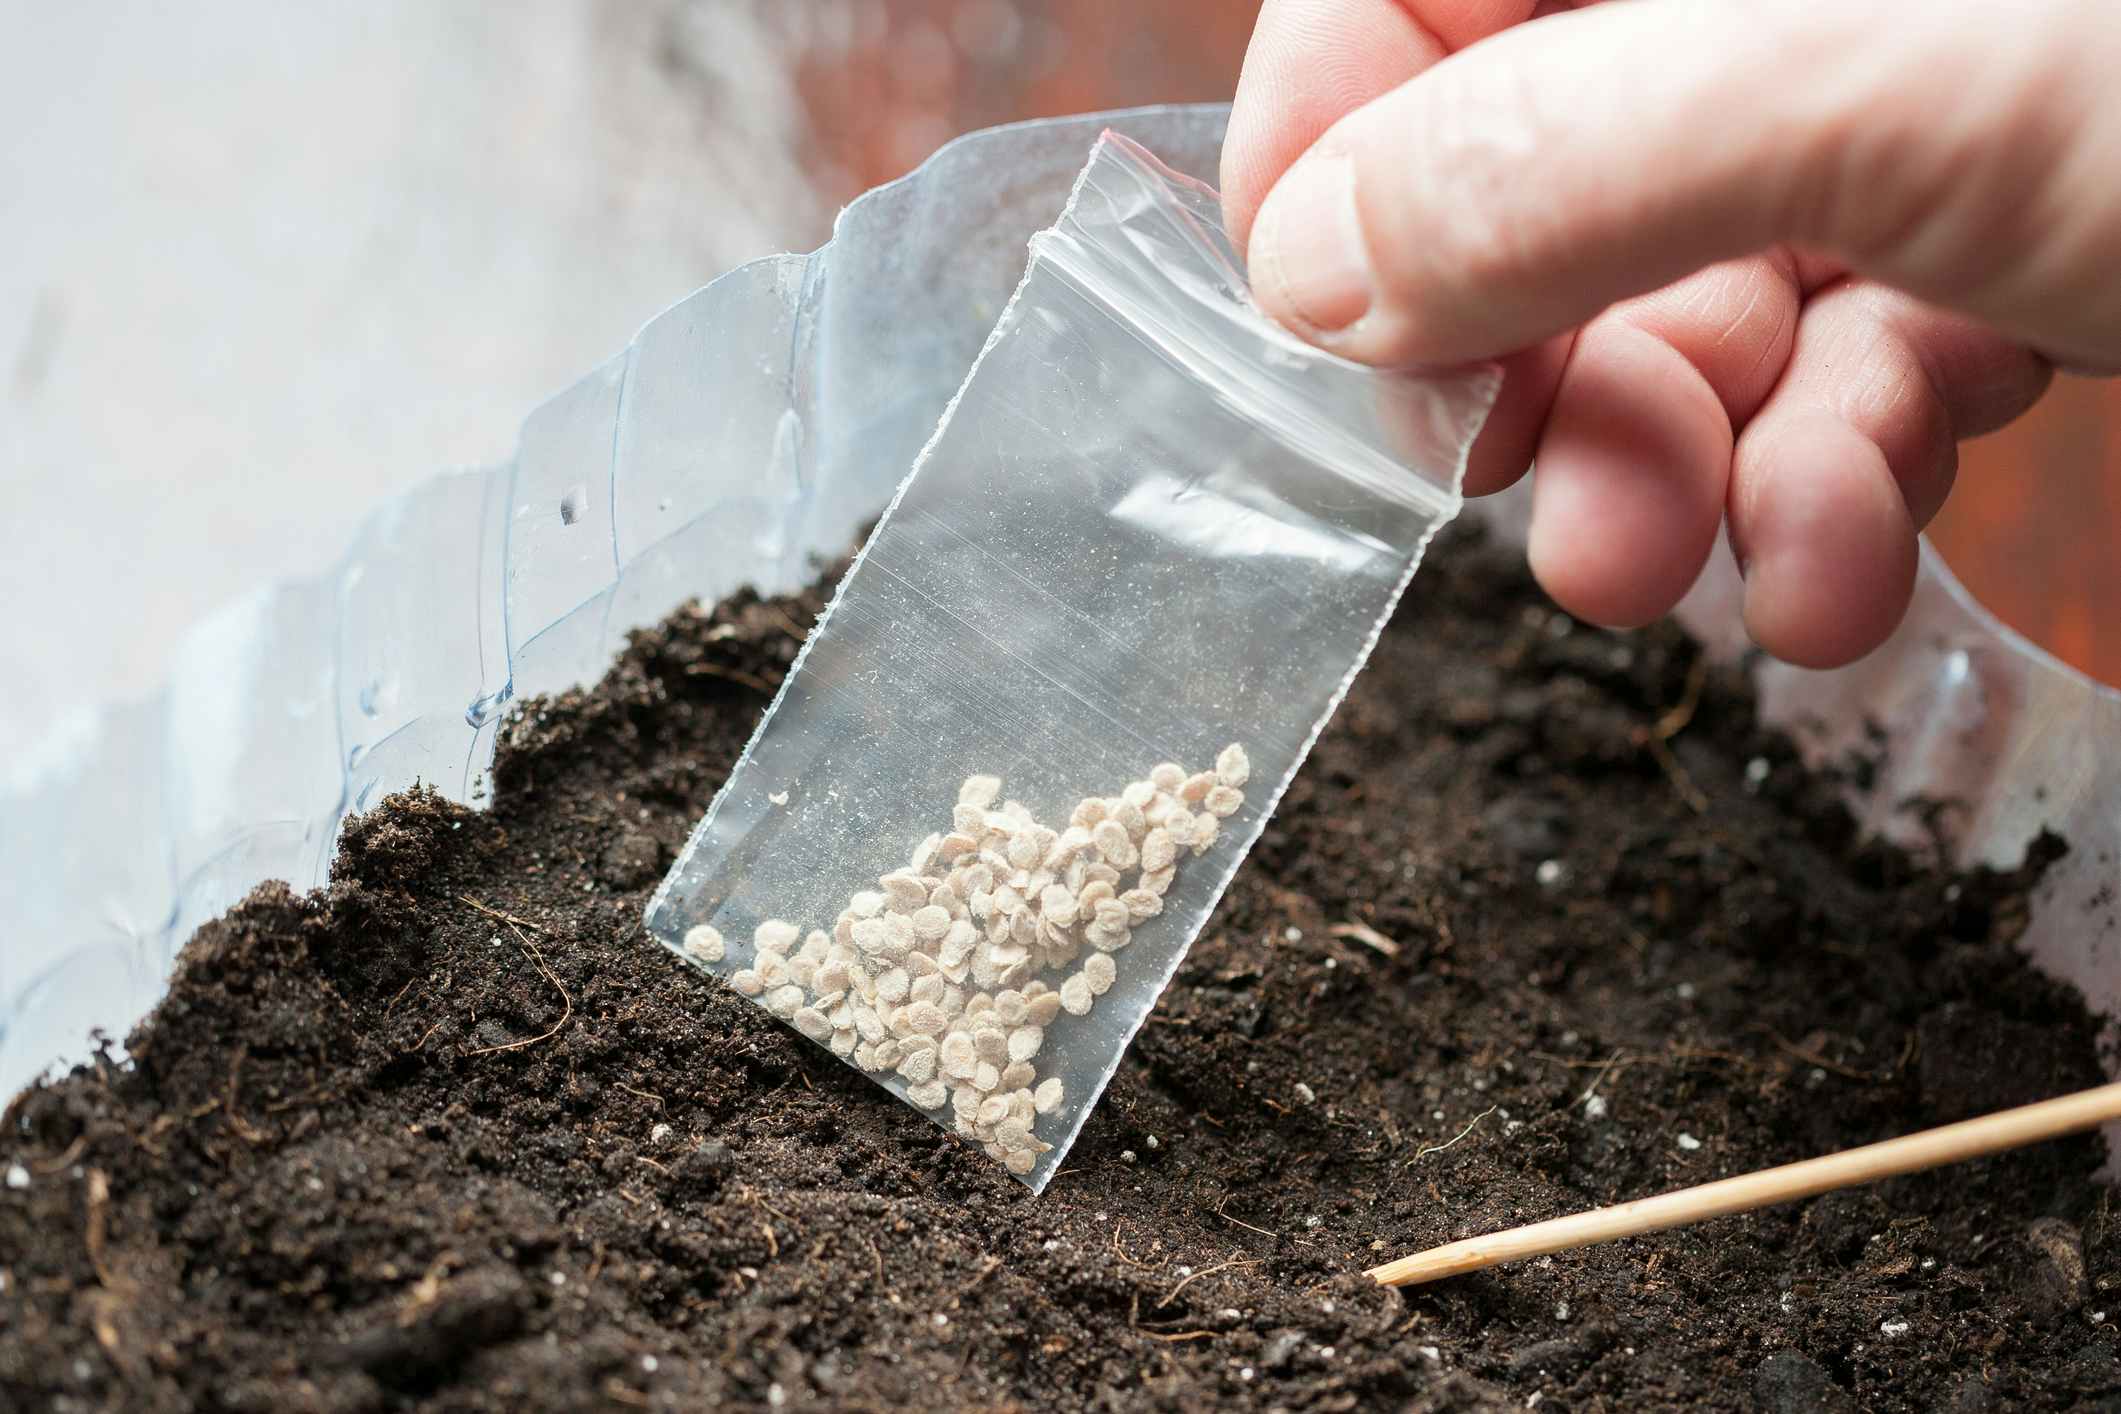 Sources for Free Vegetable Seeds